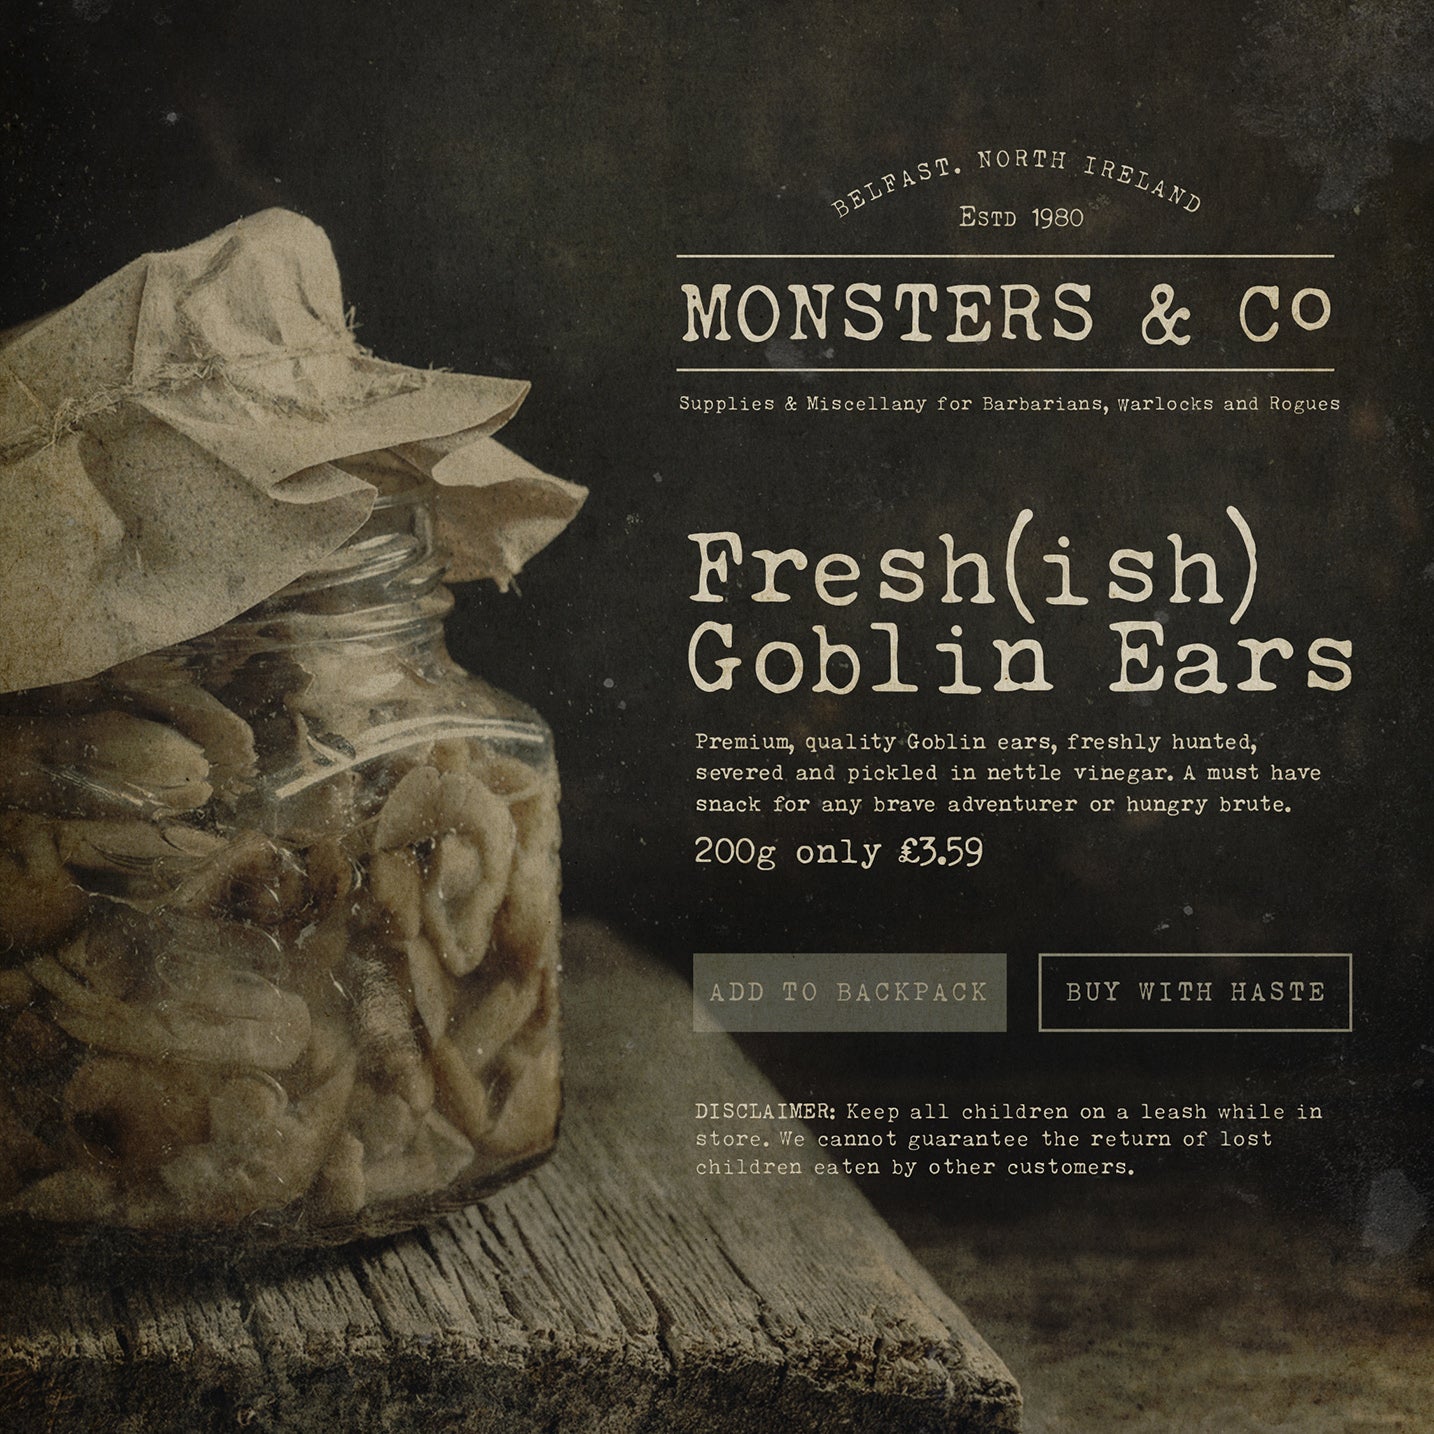 Advert for a glass jar of Goblin Ears, a fake dungeon and dragons prop to illustrate the merchant ledger font